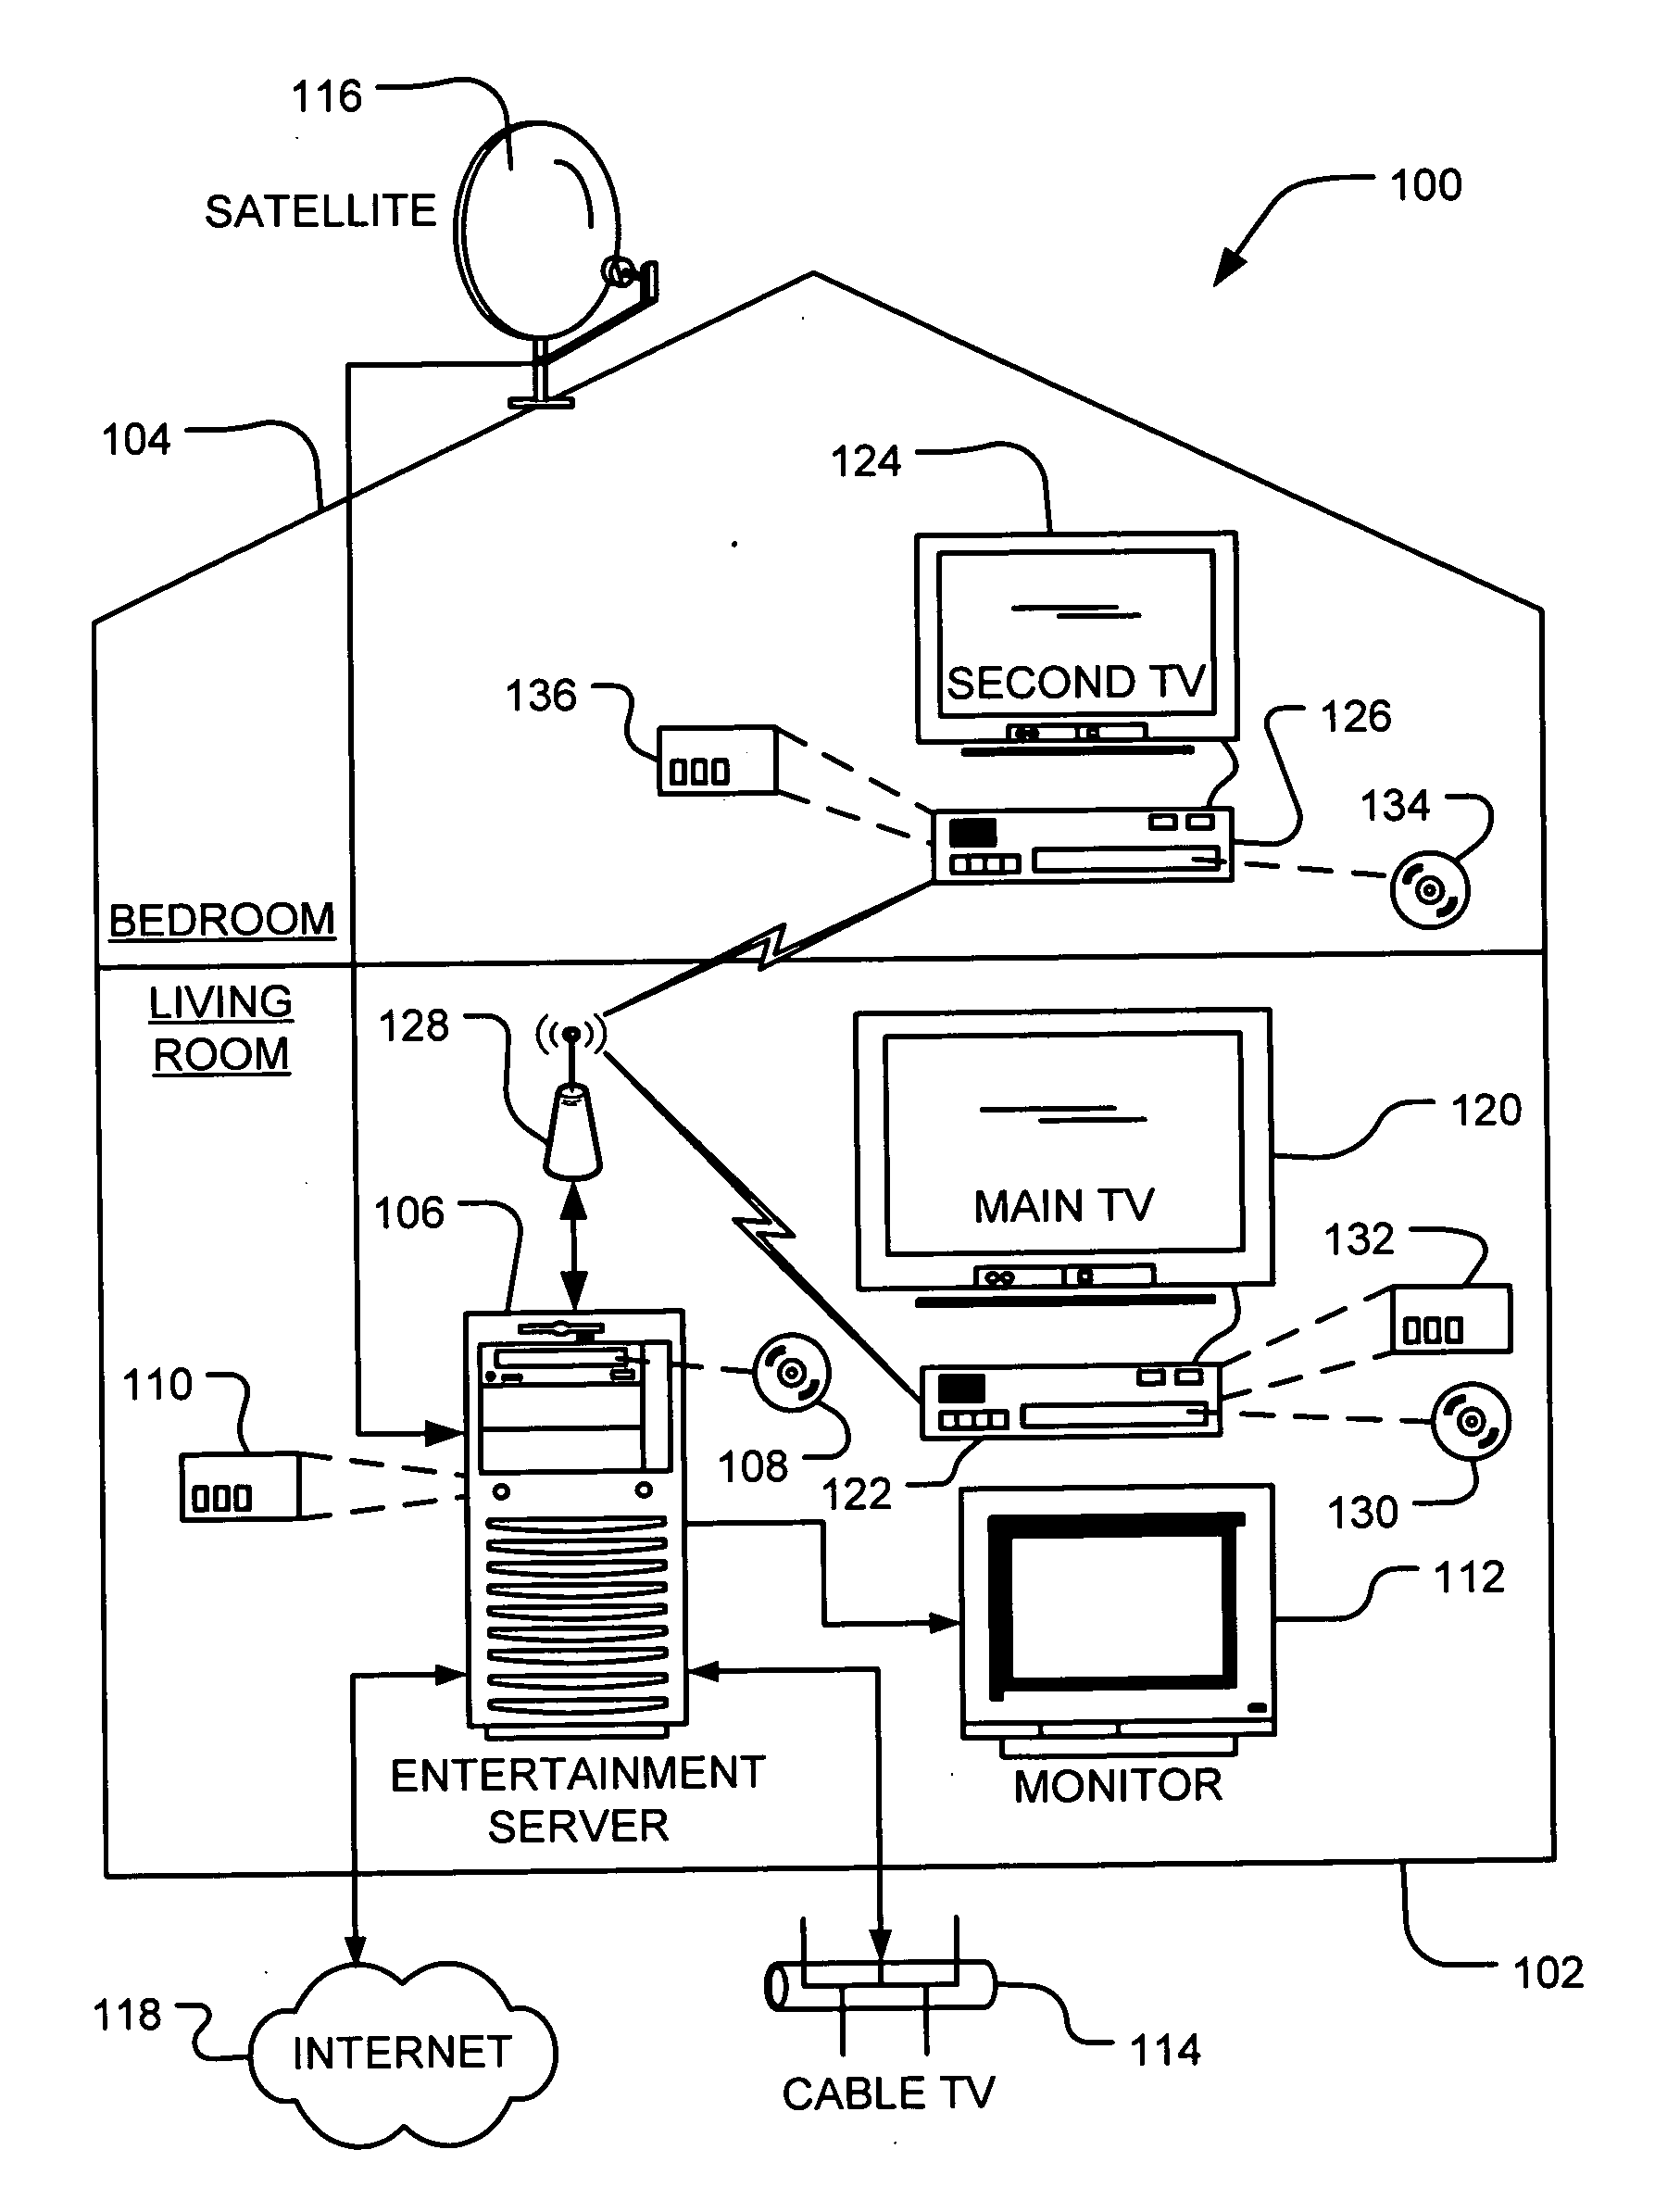 Composition of local media playback with remotely generated user interface